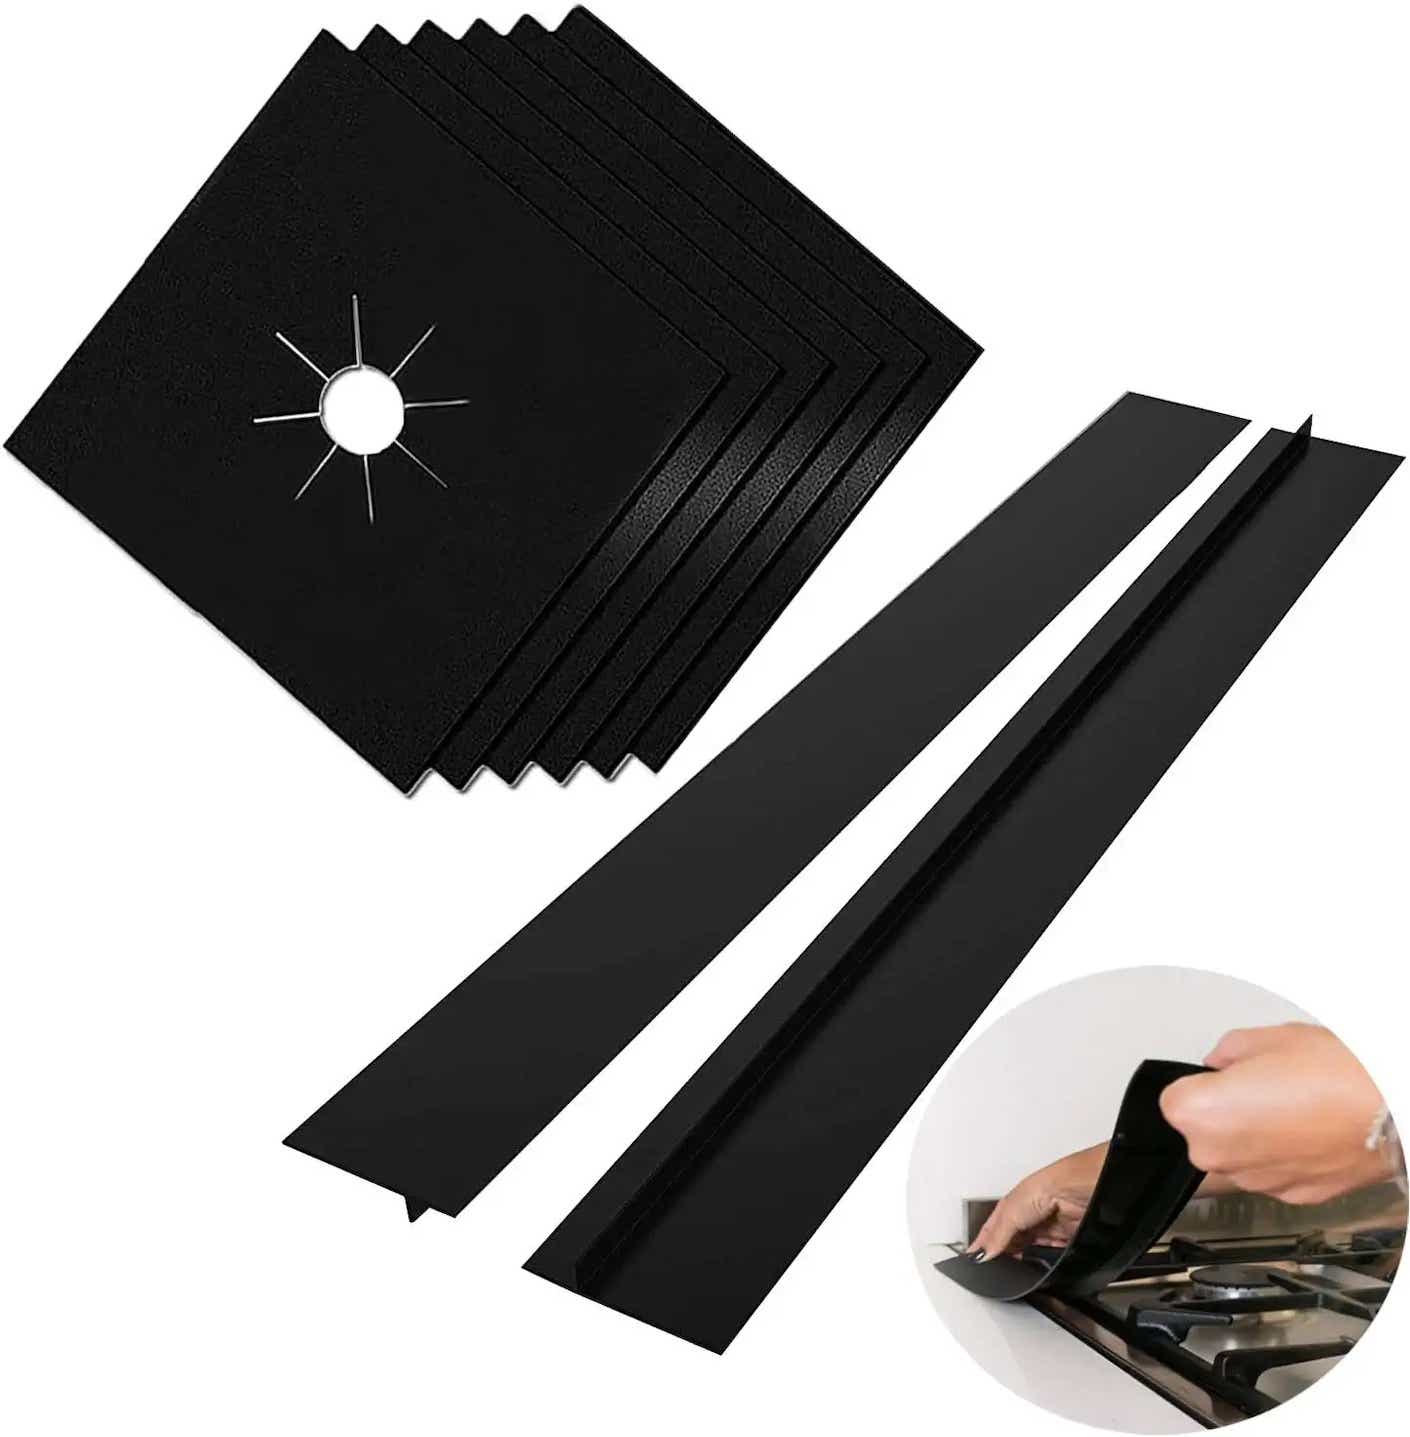 A pair of long, strips of black silicone used to fill the gaps between the stove and counter are pictured next to black squares of silicone that are used to cover stove burners.